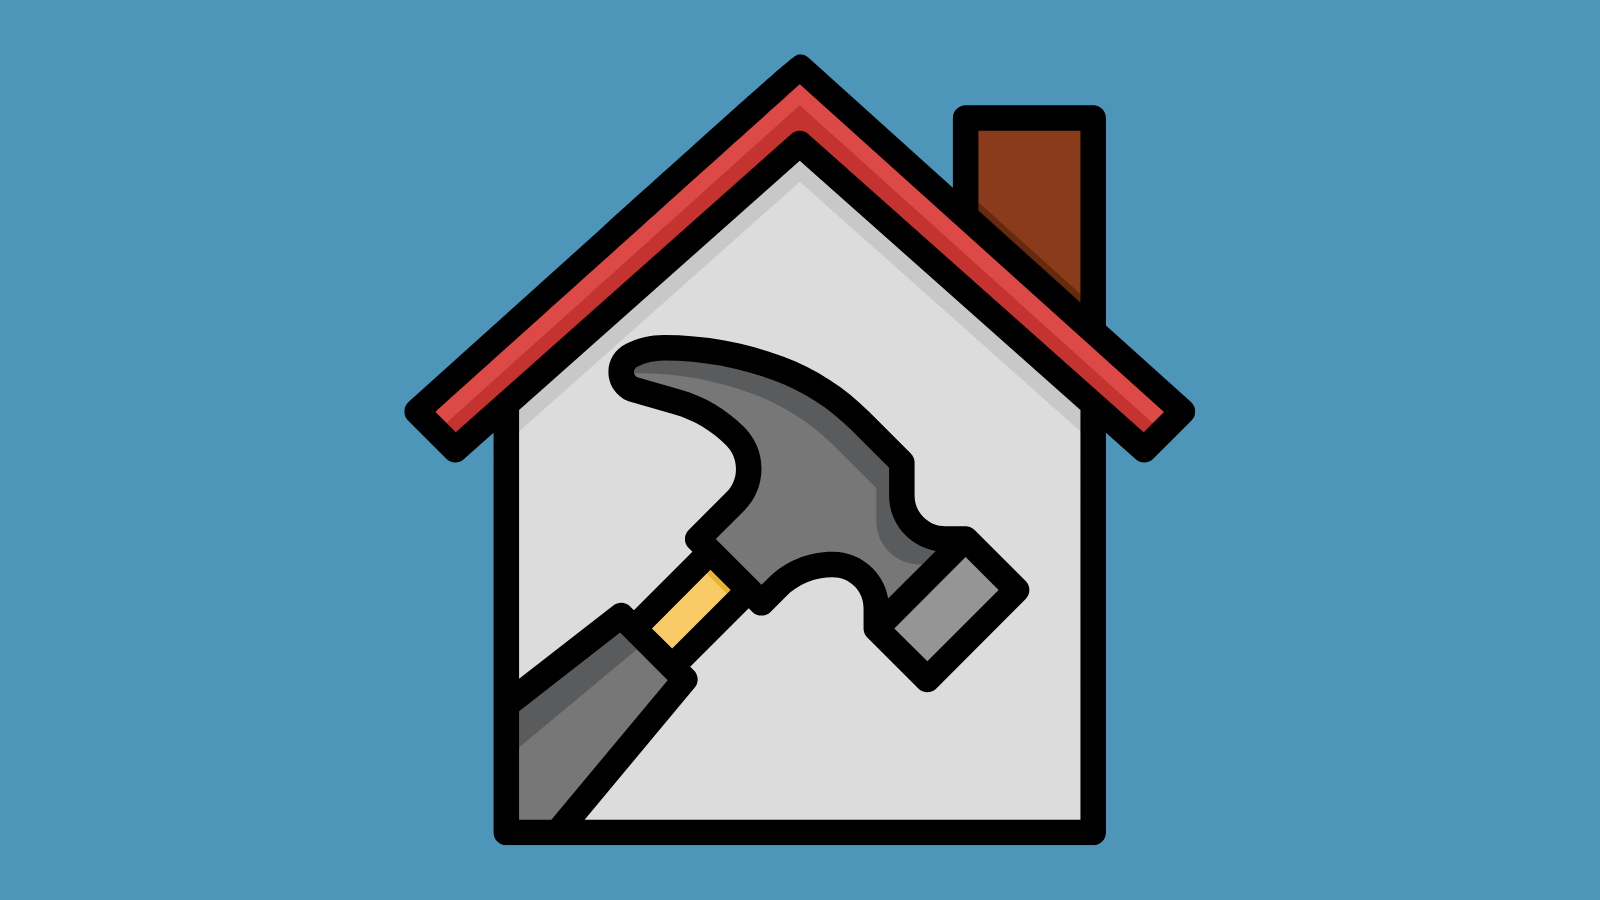 An icon of a house and a hammer